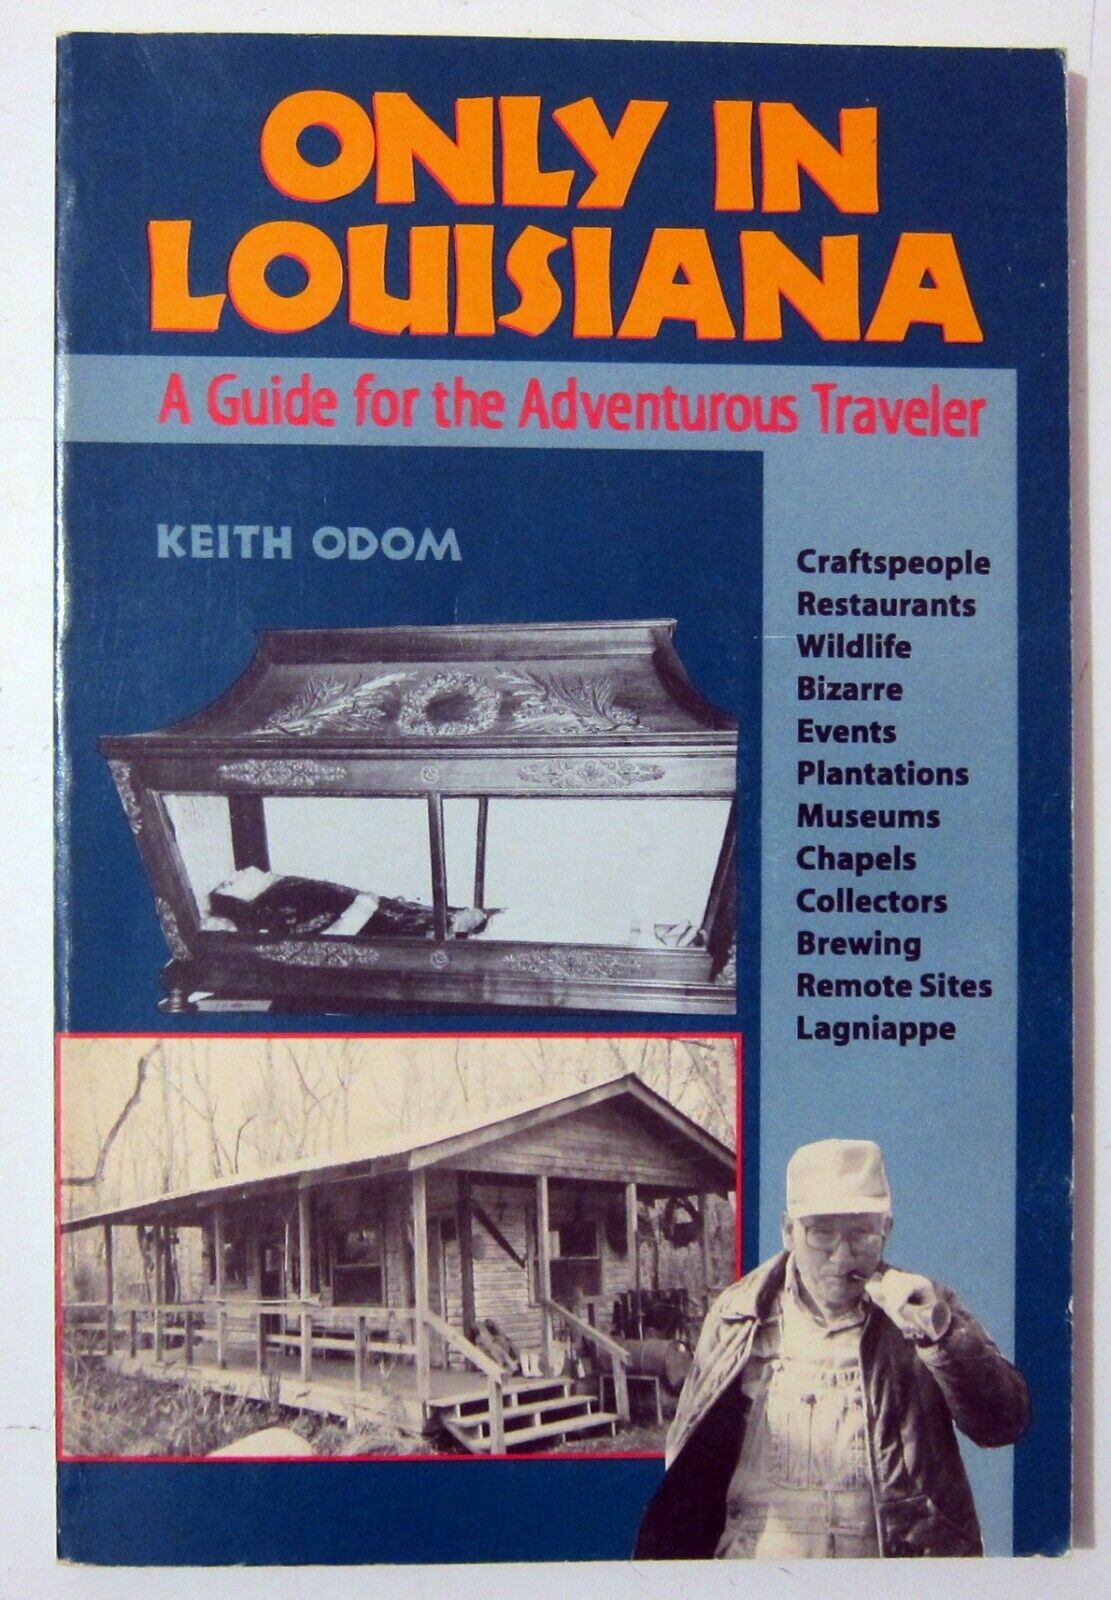 ONLY IN LOUISIANA - A Guide for the Adventurous Traveler - K Odom Signed - 1994